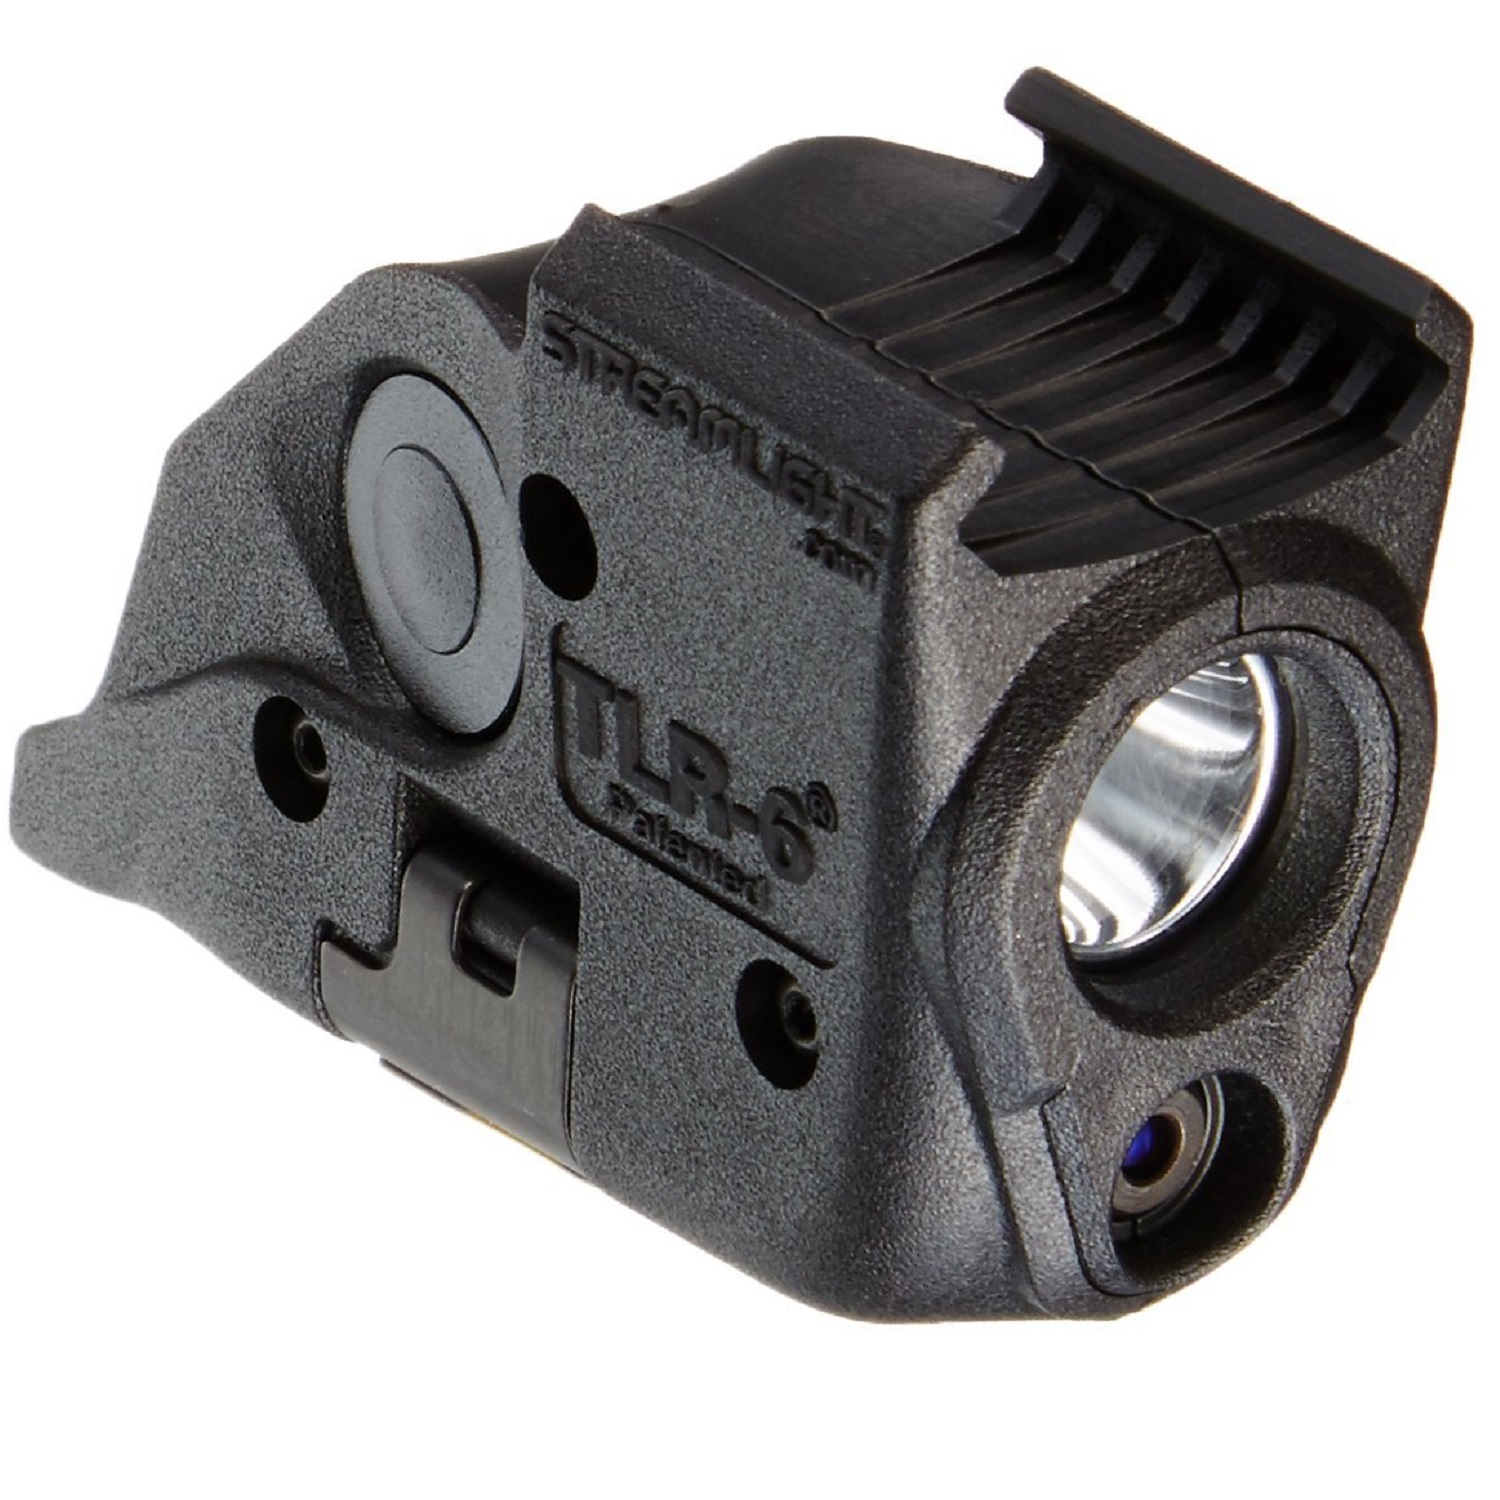 Streamlight Tlr-6 Rail Mount For Smith And Wesson Flashlight - 69293